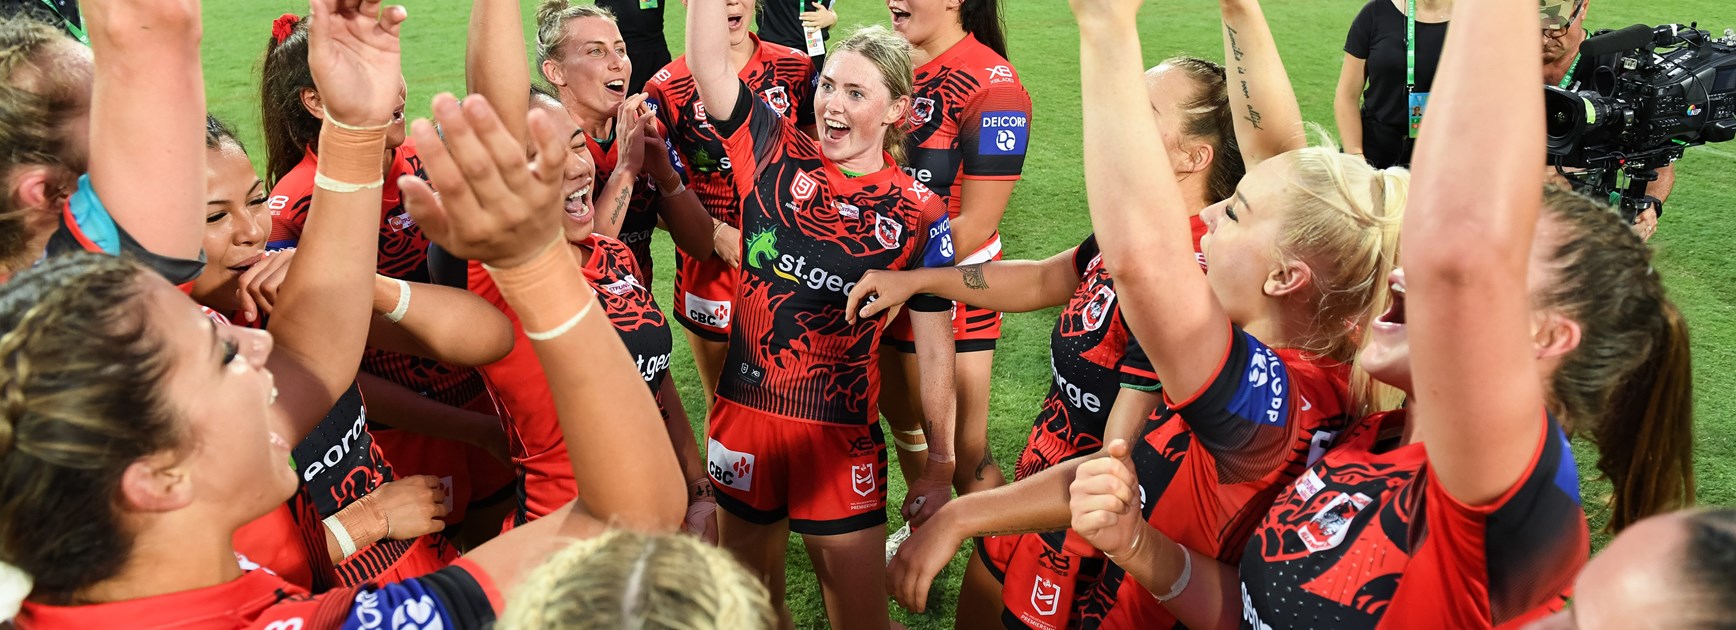 Women's Rugby League elite competition confirmed for 2020